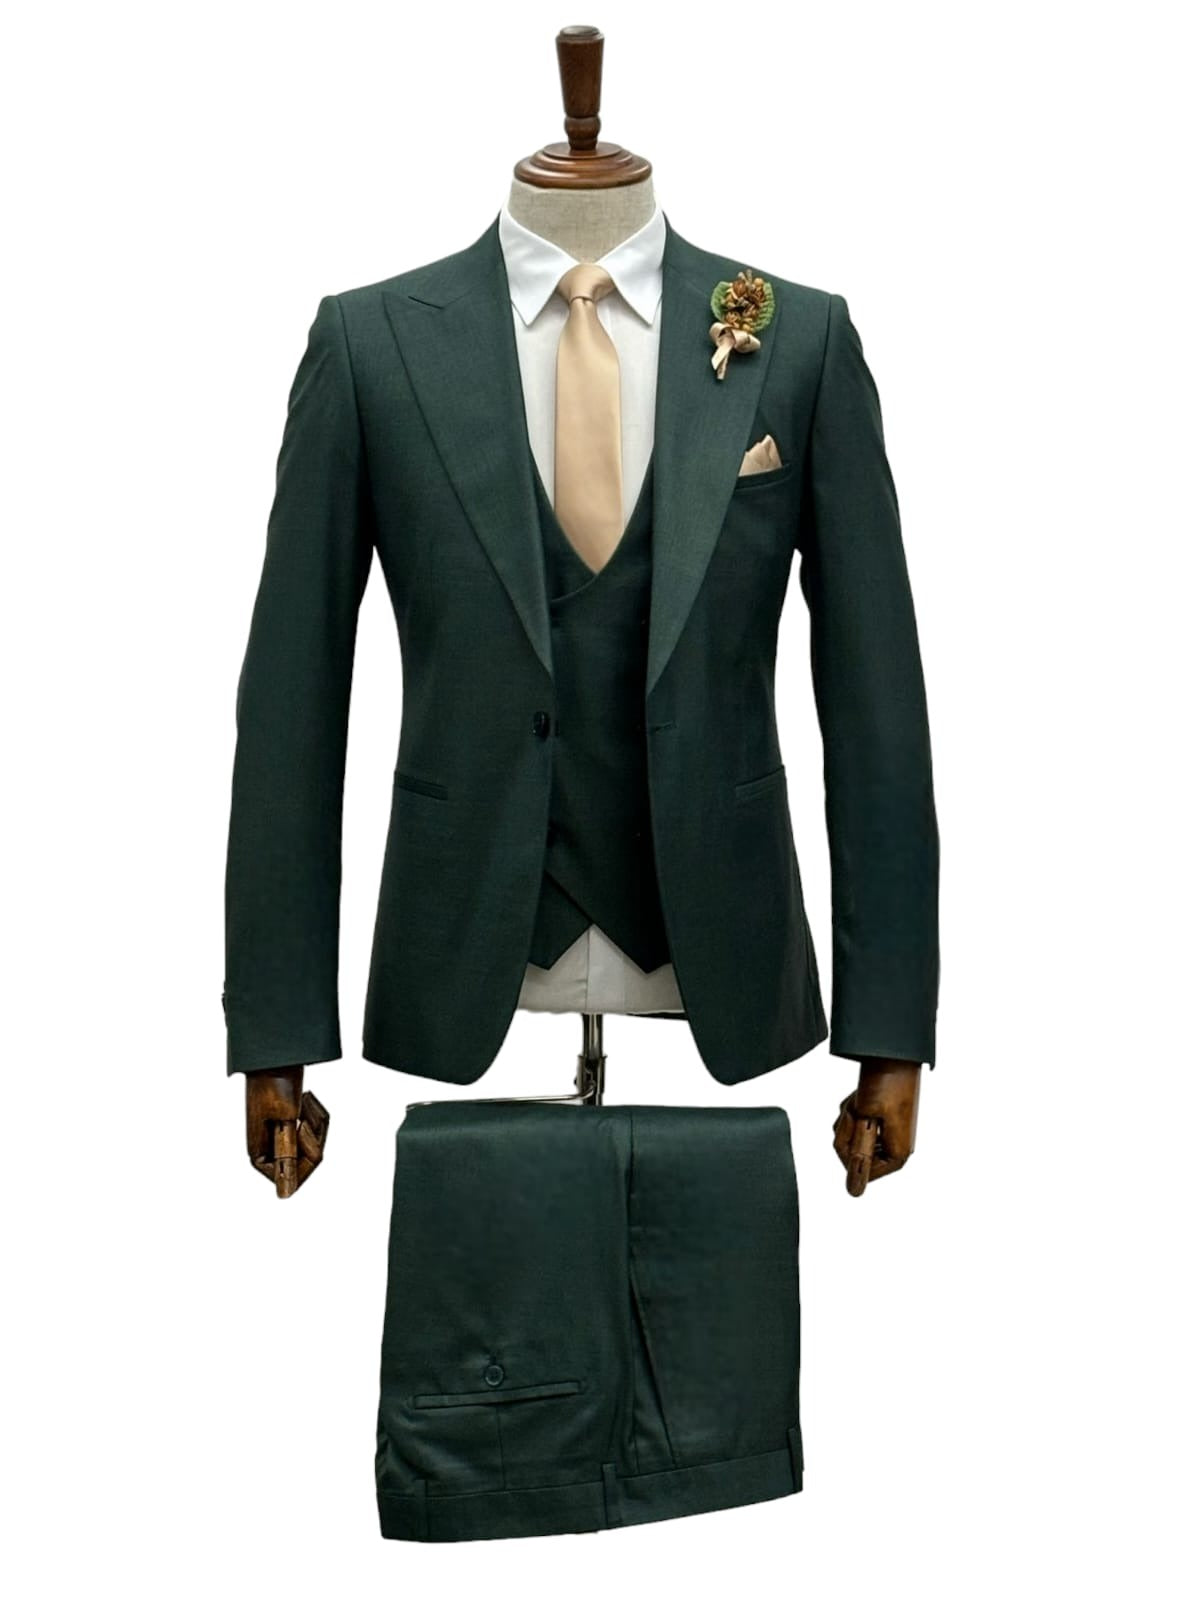 Giovanni Testi Suits With Double Breasted Vest - 3 Piece Green